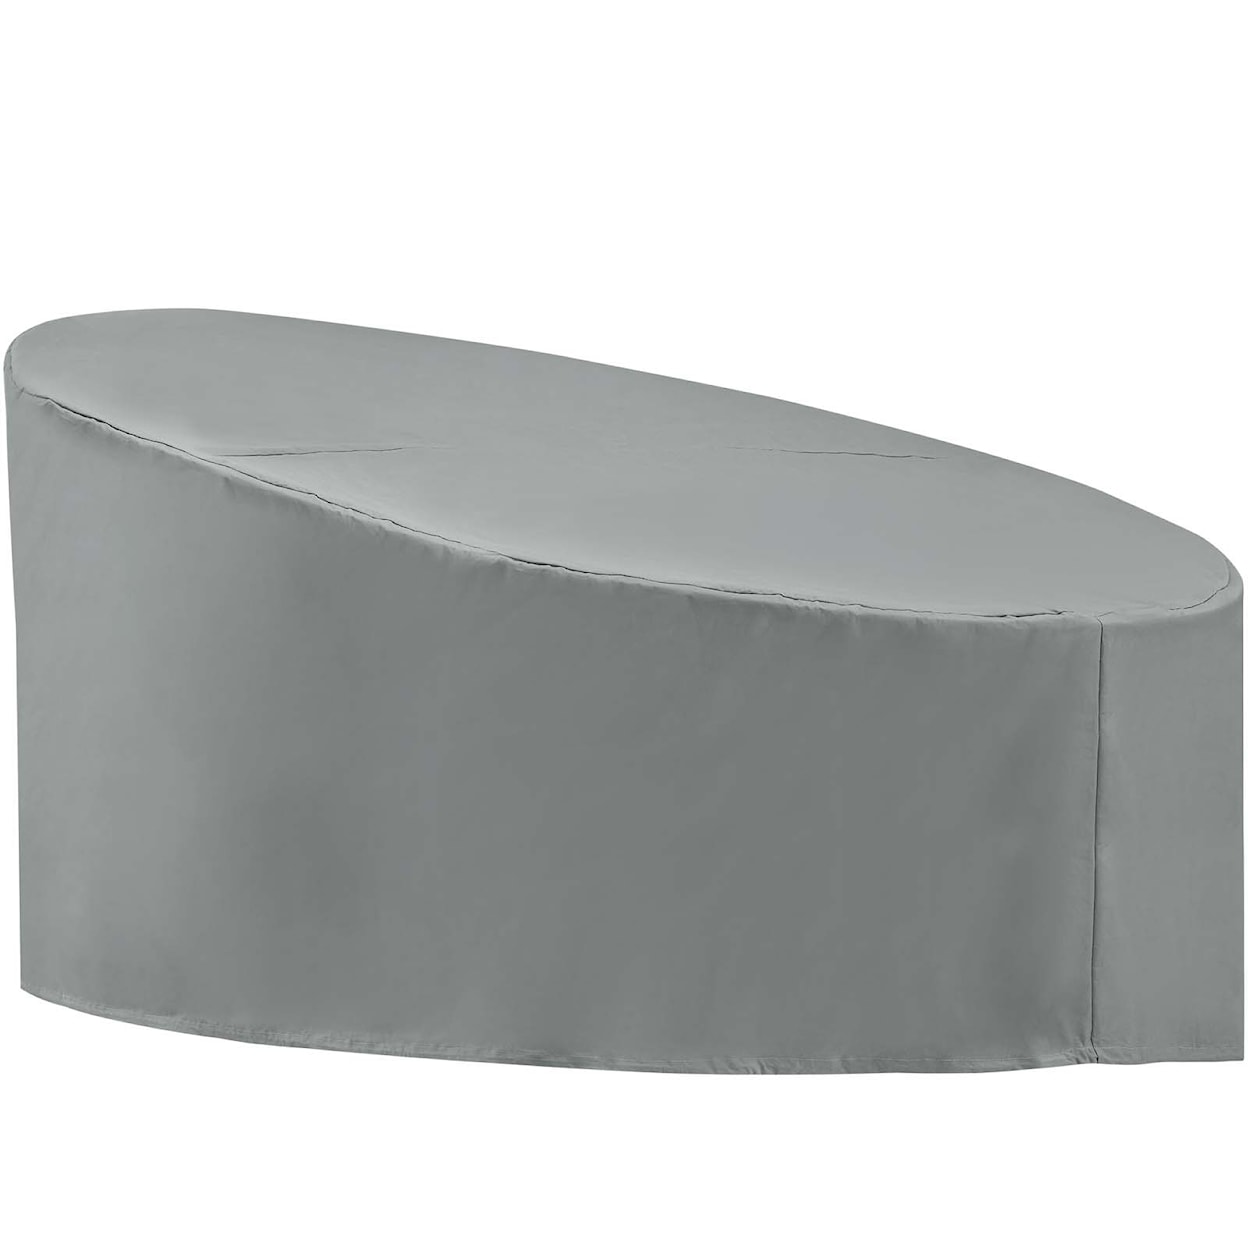 Modway Immerse Outdoor Furniture Cover